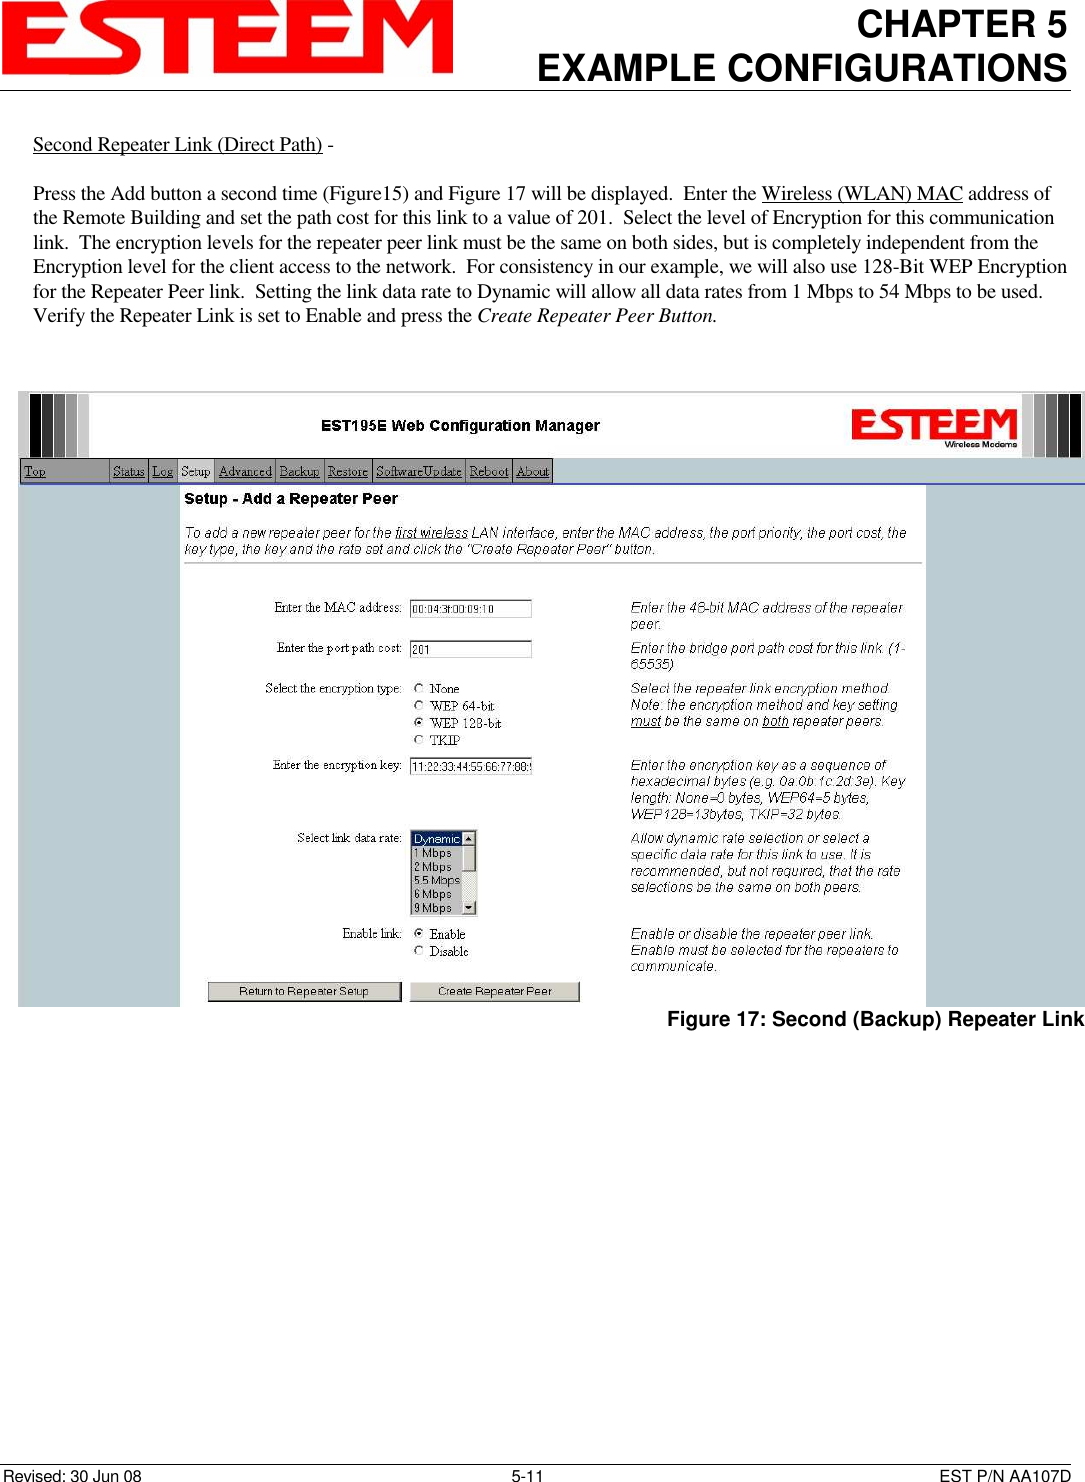 CHAPTER 5 EXAMPLE CONFIGURATIONS    Revised: 30 Jun 08  5-11  EST P/N AA107D Second Repeater Link (Direct Path) -    Press the Add button a second time (Figure15) and Figure 17 will be displayed.  Enter the Wireless (WLAN) MAC address of the Remote Building and set the path cost for this link to a value of 201.  Select the level of Encryption for this communication link.  The encryption levels for the repeater peer link must be the same on both sides, but is completely independent from the Encryption level for the client access to the network.  For consistency in our example, we will also use 128-Bit WEP Encryption for the Repeater Peer link.  Setting the link data rate to Dynamic will allow all data rates from 1 Mbps to 54 Mbps to be used.  Verify the Repeater Link is set to Enable and press the Create Repeater Peer Button.     Figure 17: Second (Backup) Repeater Link 